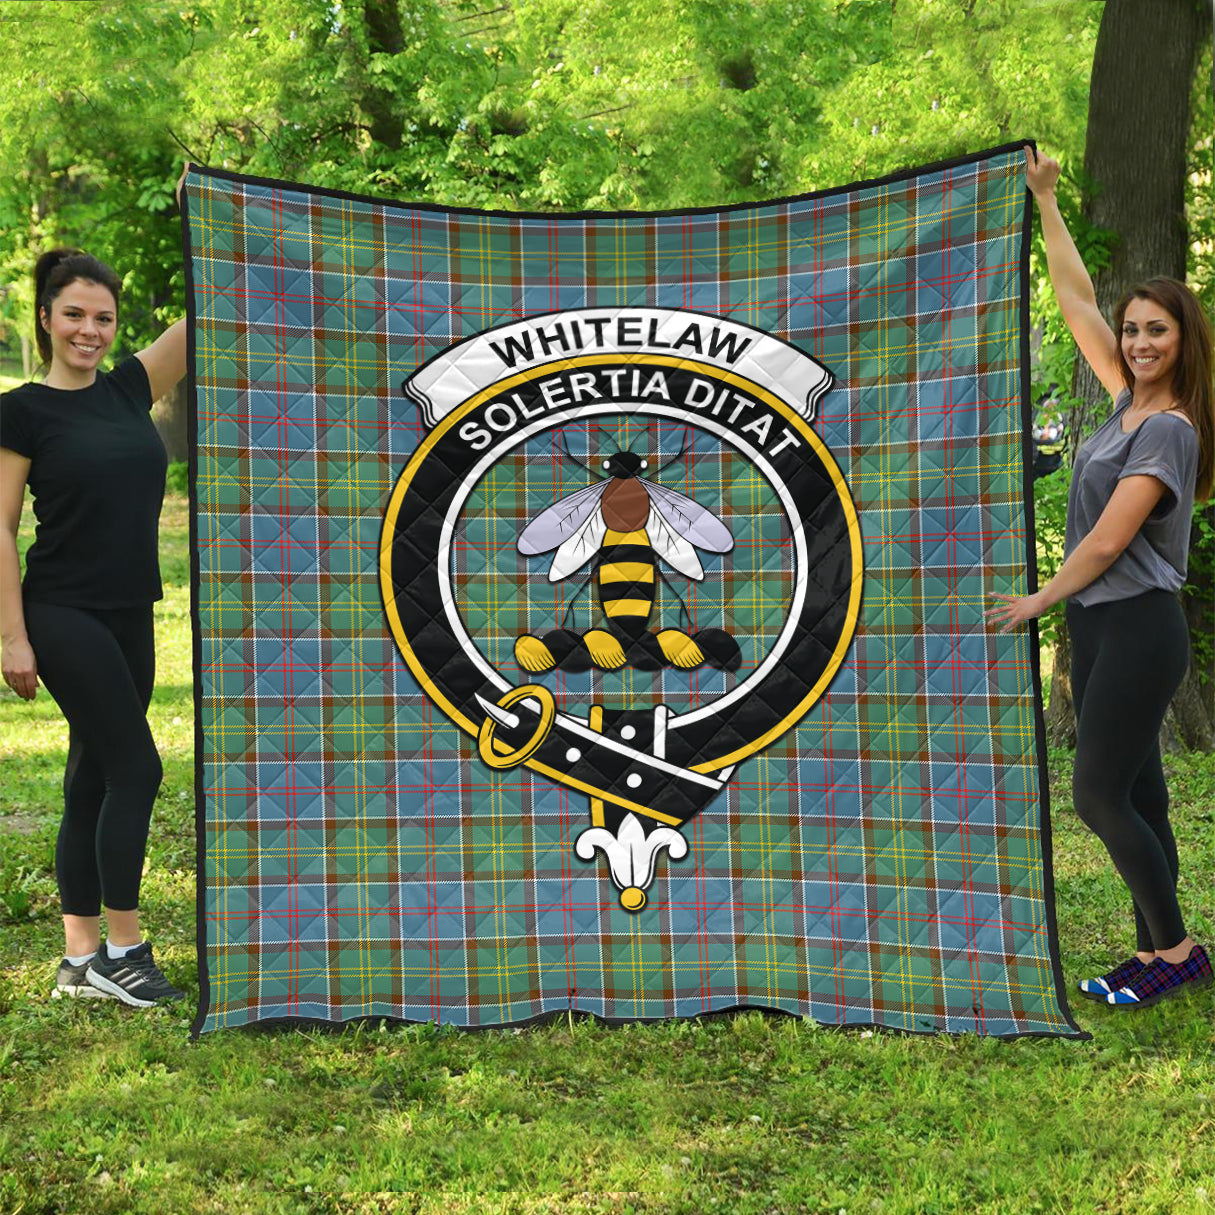 whitelaw-tartan-quilt-with-family-crest